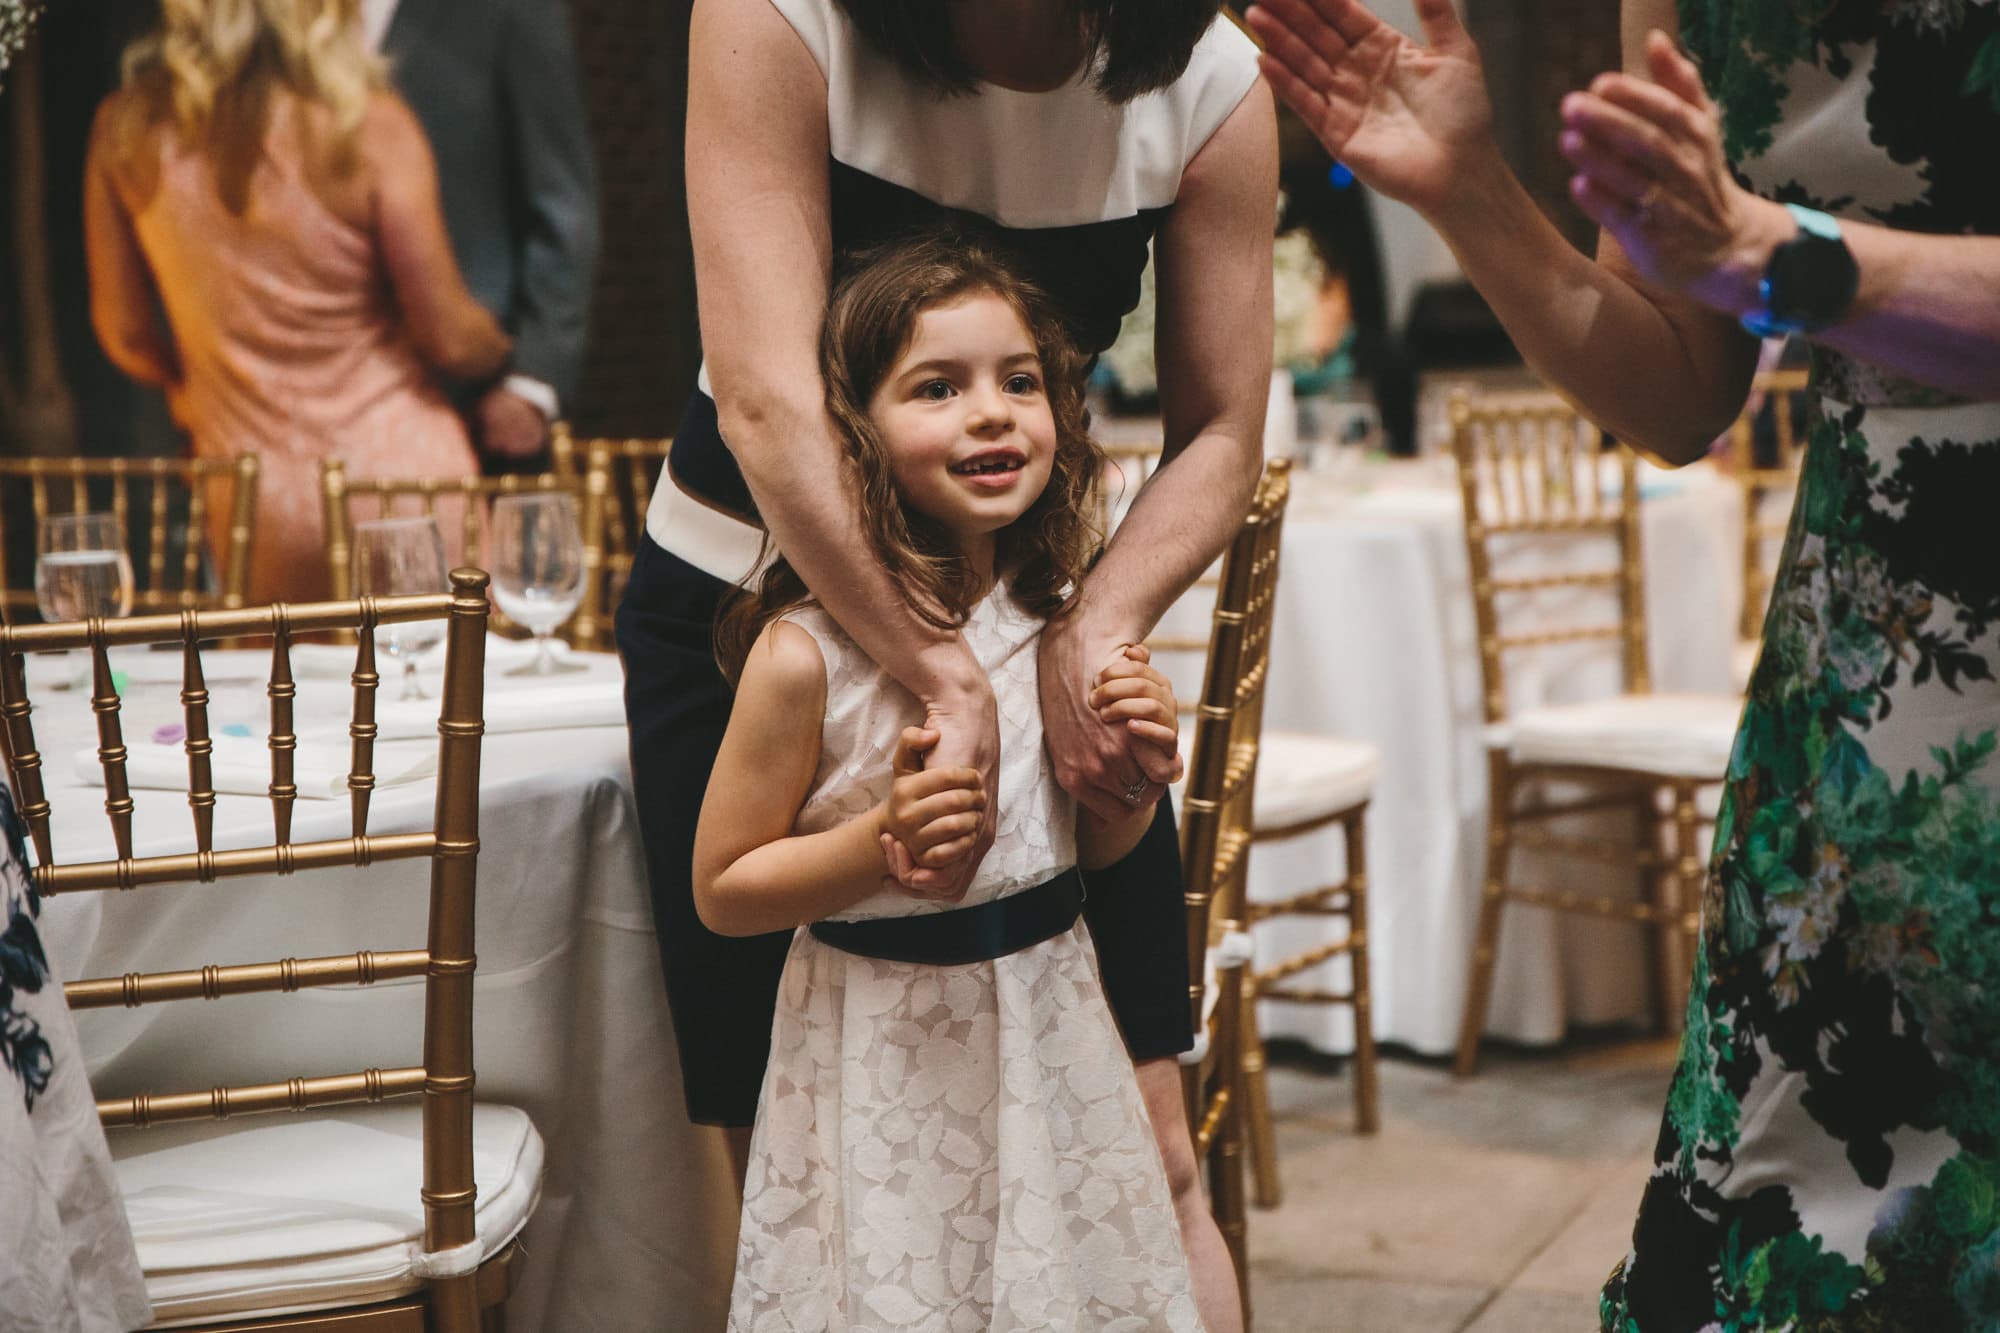 This documentary photograph of a flower girl watching guests dance is one of the best wedding photographs of 2016